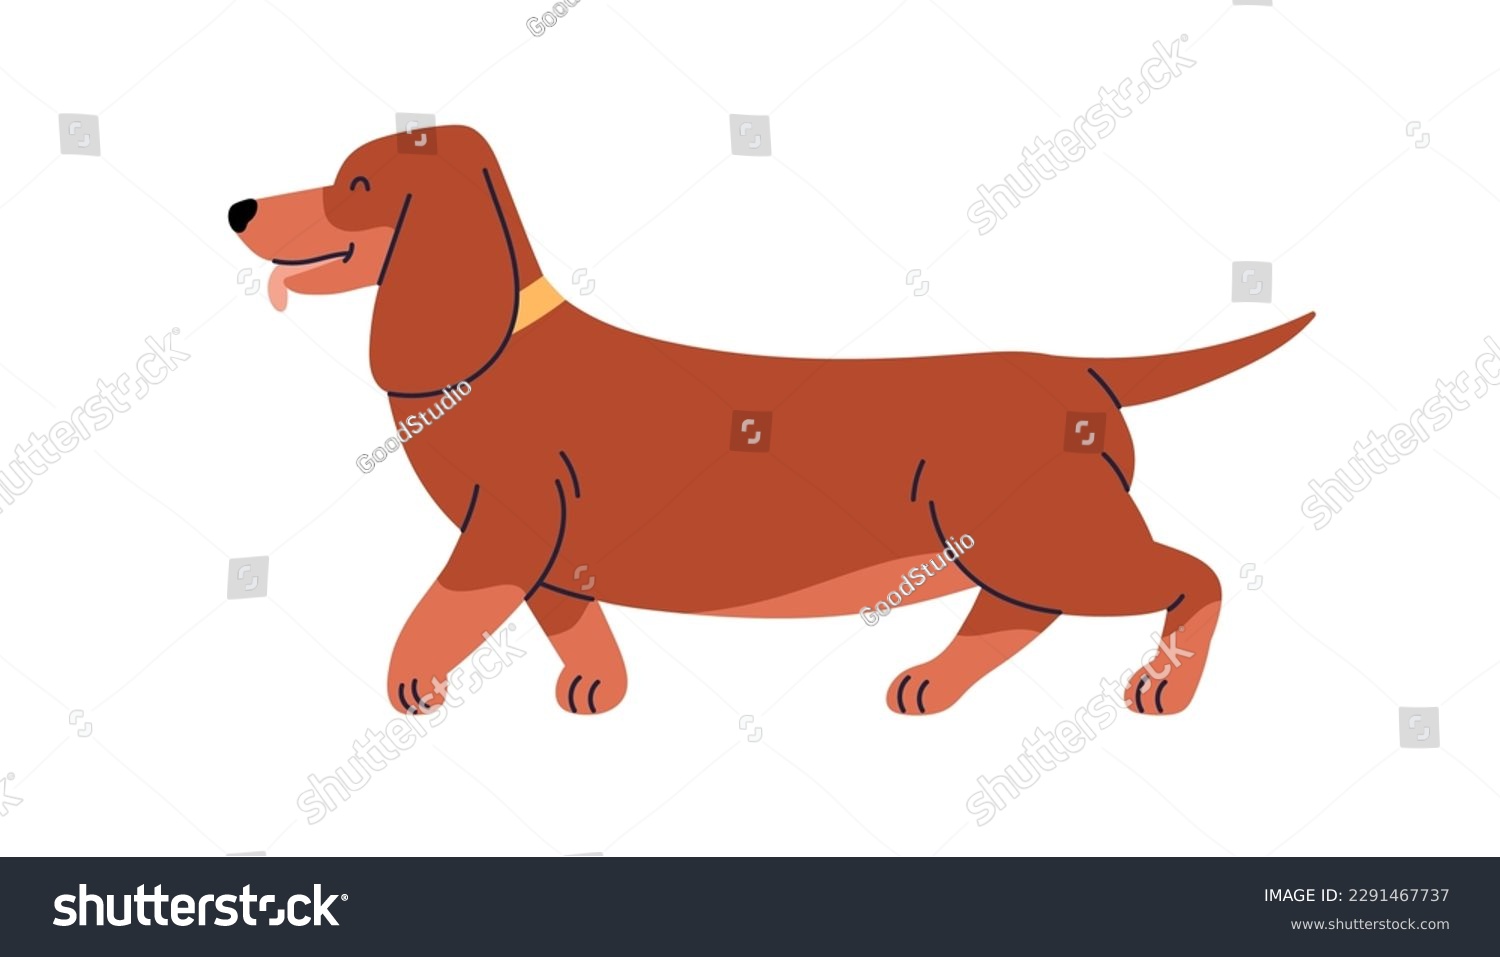 SVG of Dachshund, cute Wiener sausage dog profile. Funny companion doggy, pup side view. Adorable short puppy, canine animal walking, strolling. Flat vector illustration isolated on white background svg